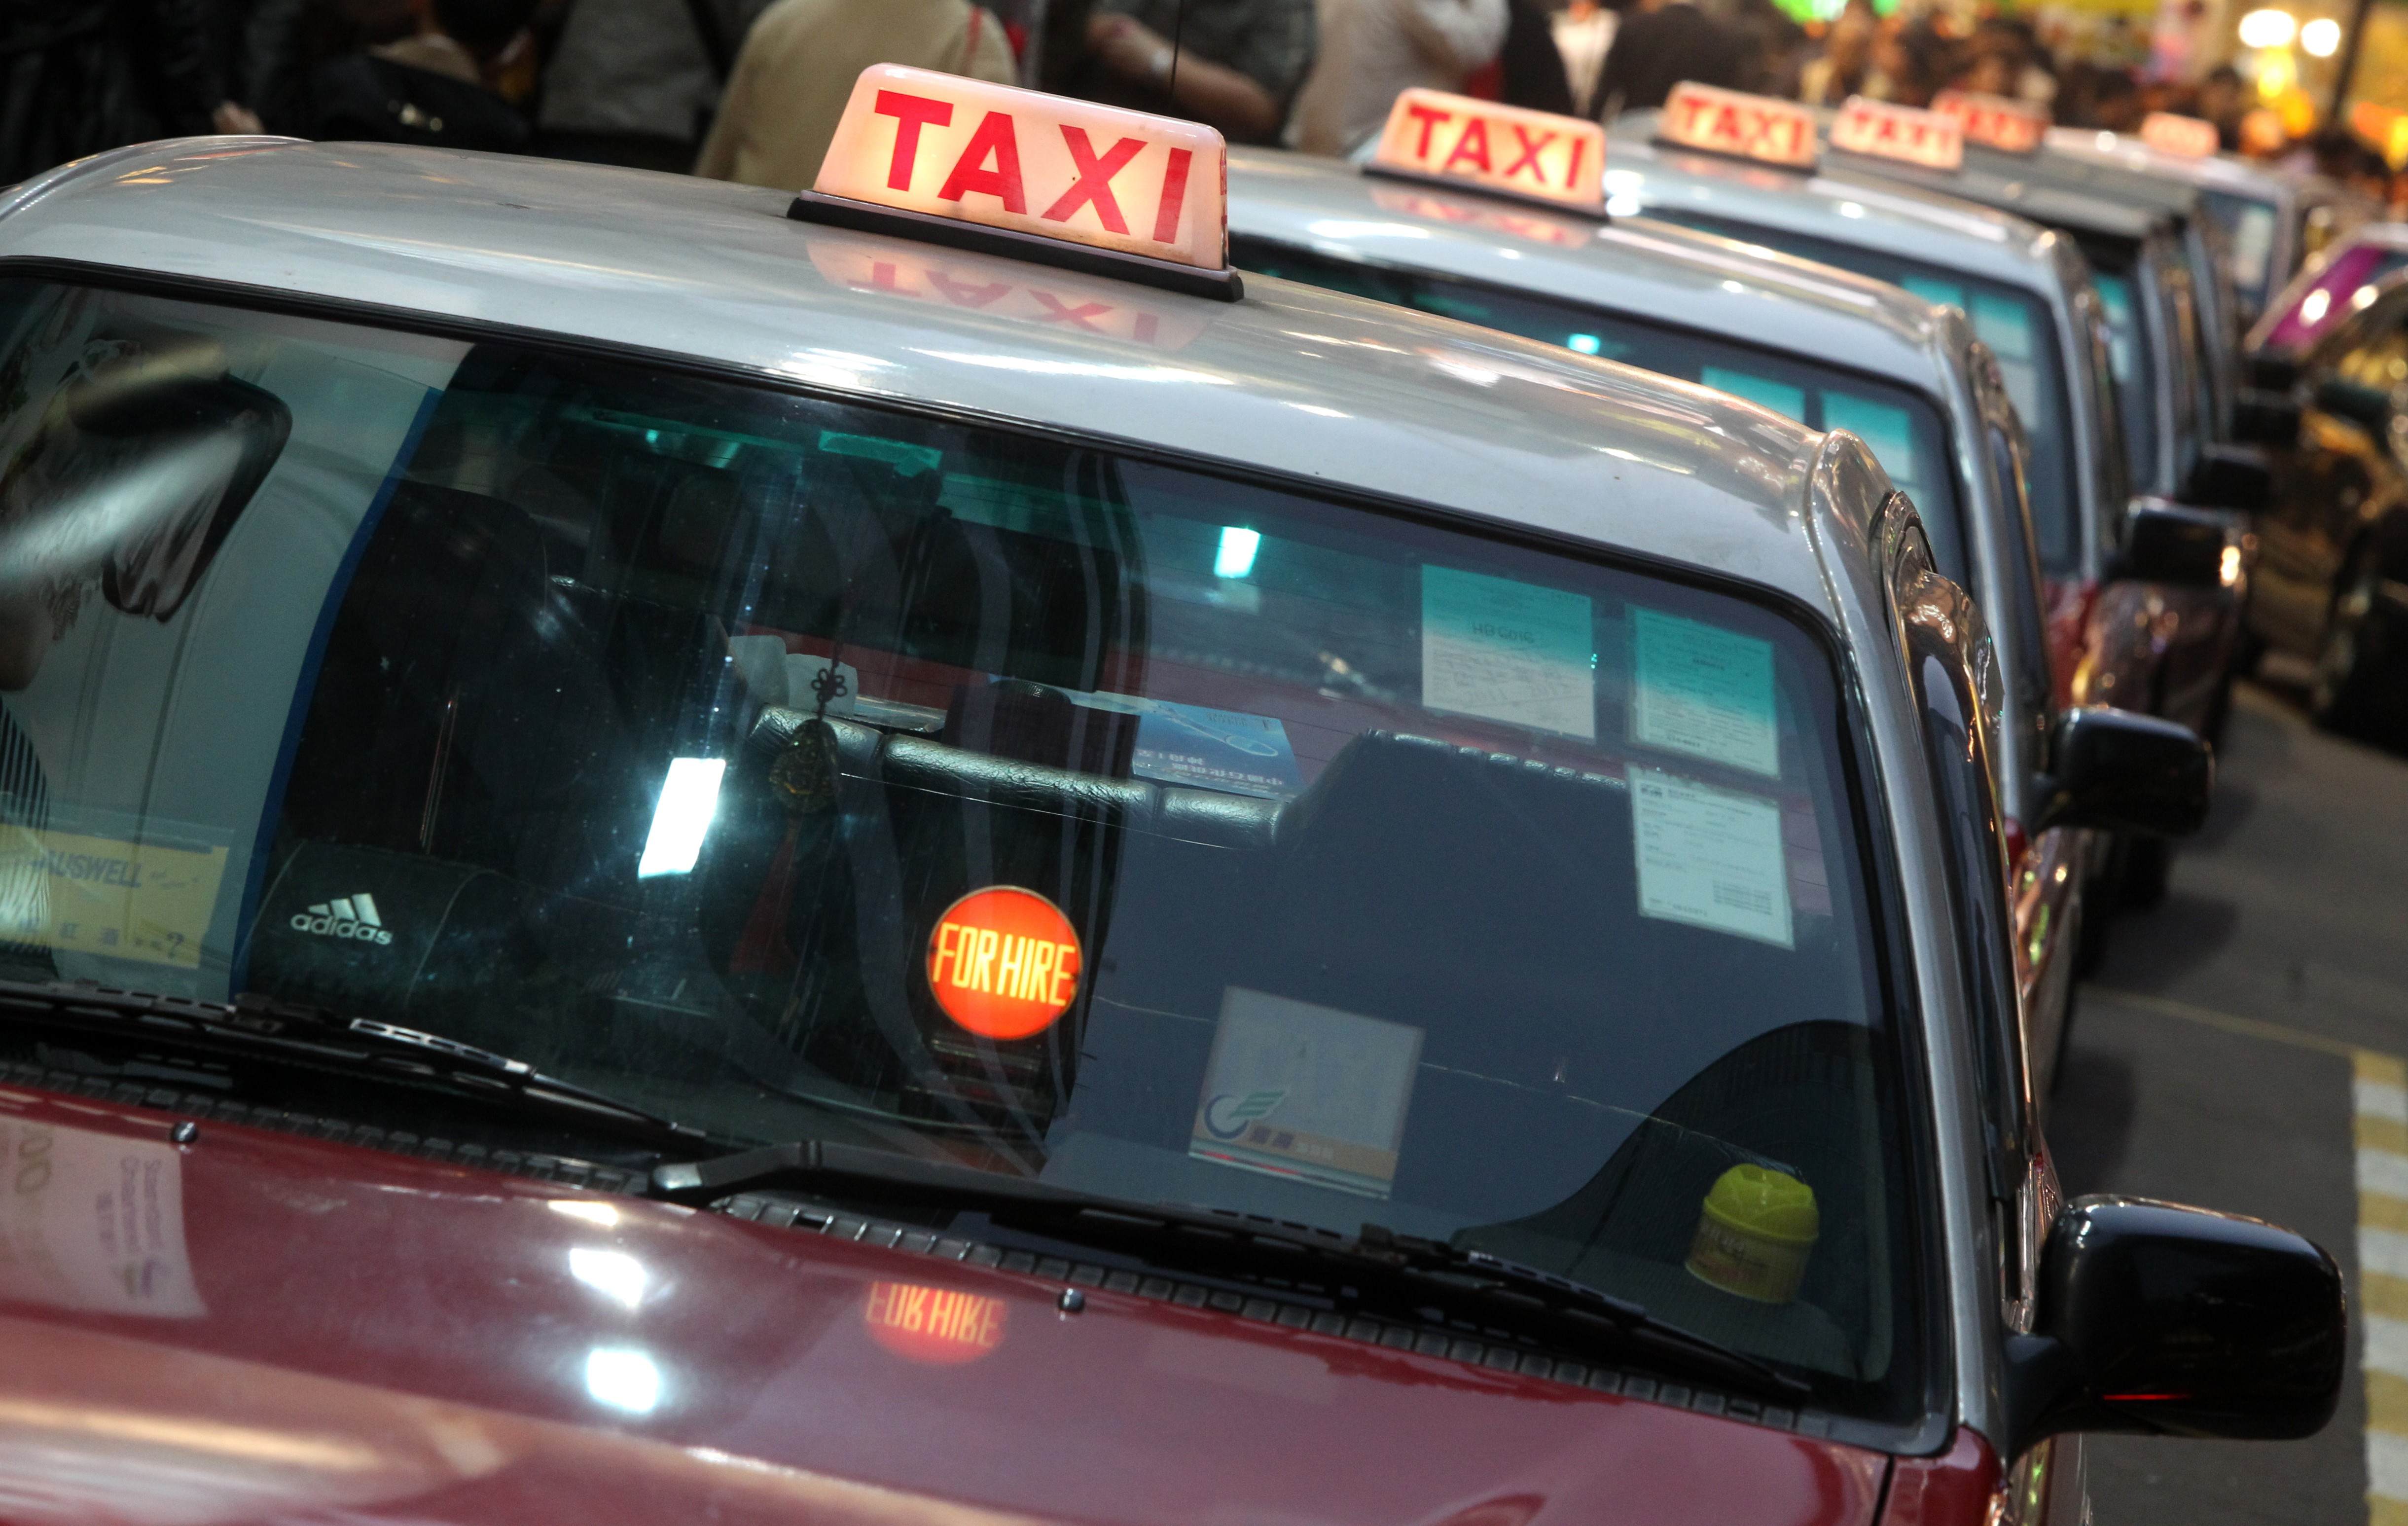 Government acts to combat city’s notoriously bad service with list of offences that could get taxi drivers in trouble including, taking a longer route than necessary, overcharging or refusing a fare